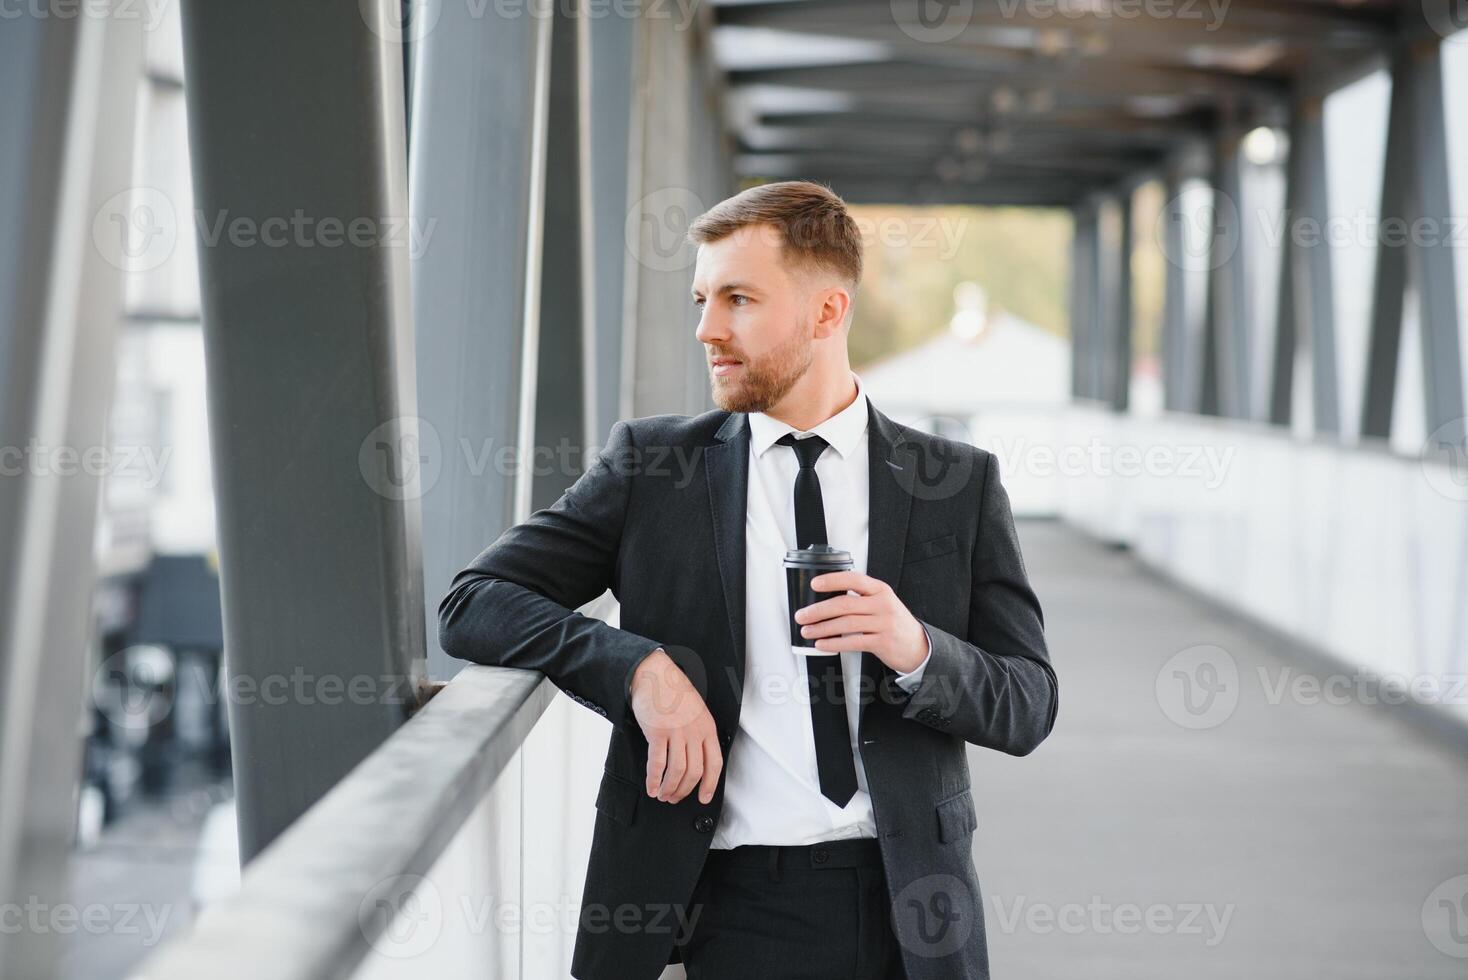 Takeaway coffee. Walk and enjoy fresh hot coffee. Waiting for someone in street. Man bearded hipster drink coffee paper cup. Businessman well groomed enjoy coffee break outdoors urban background photo